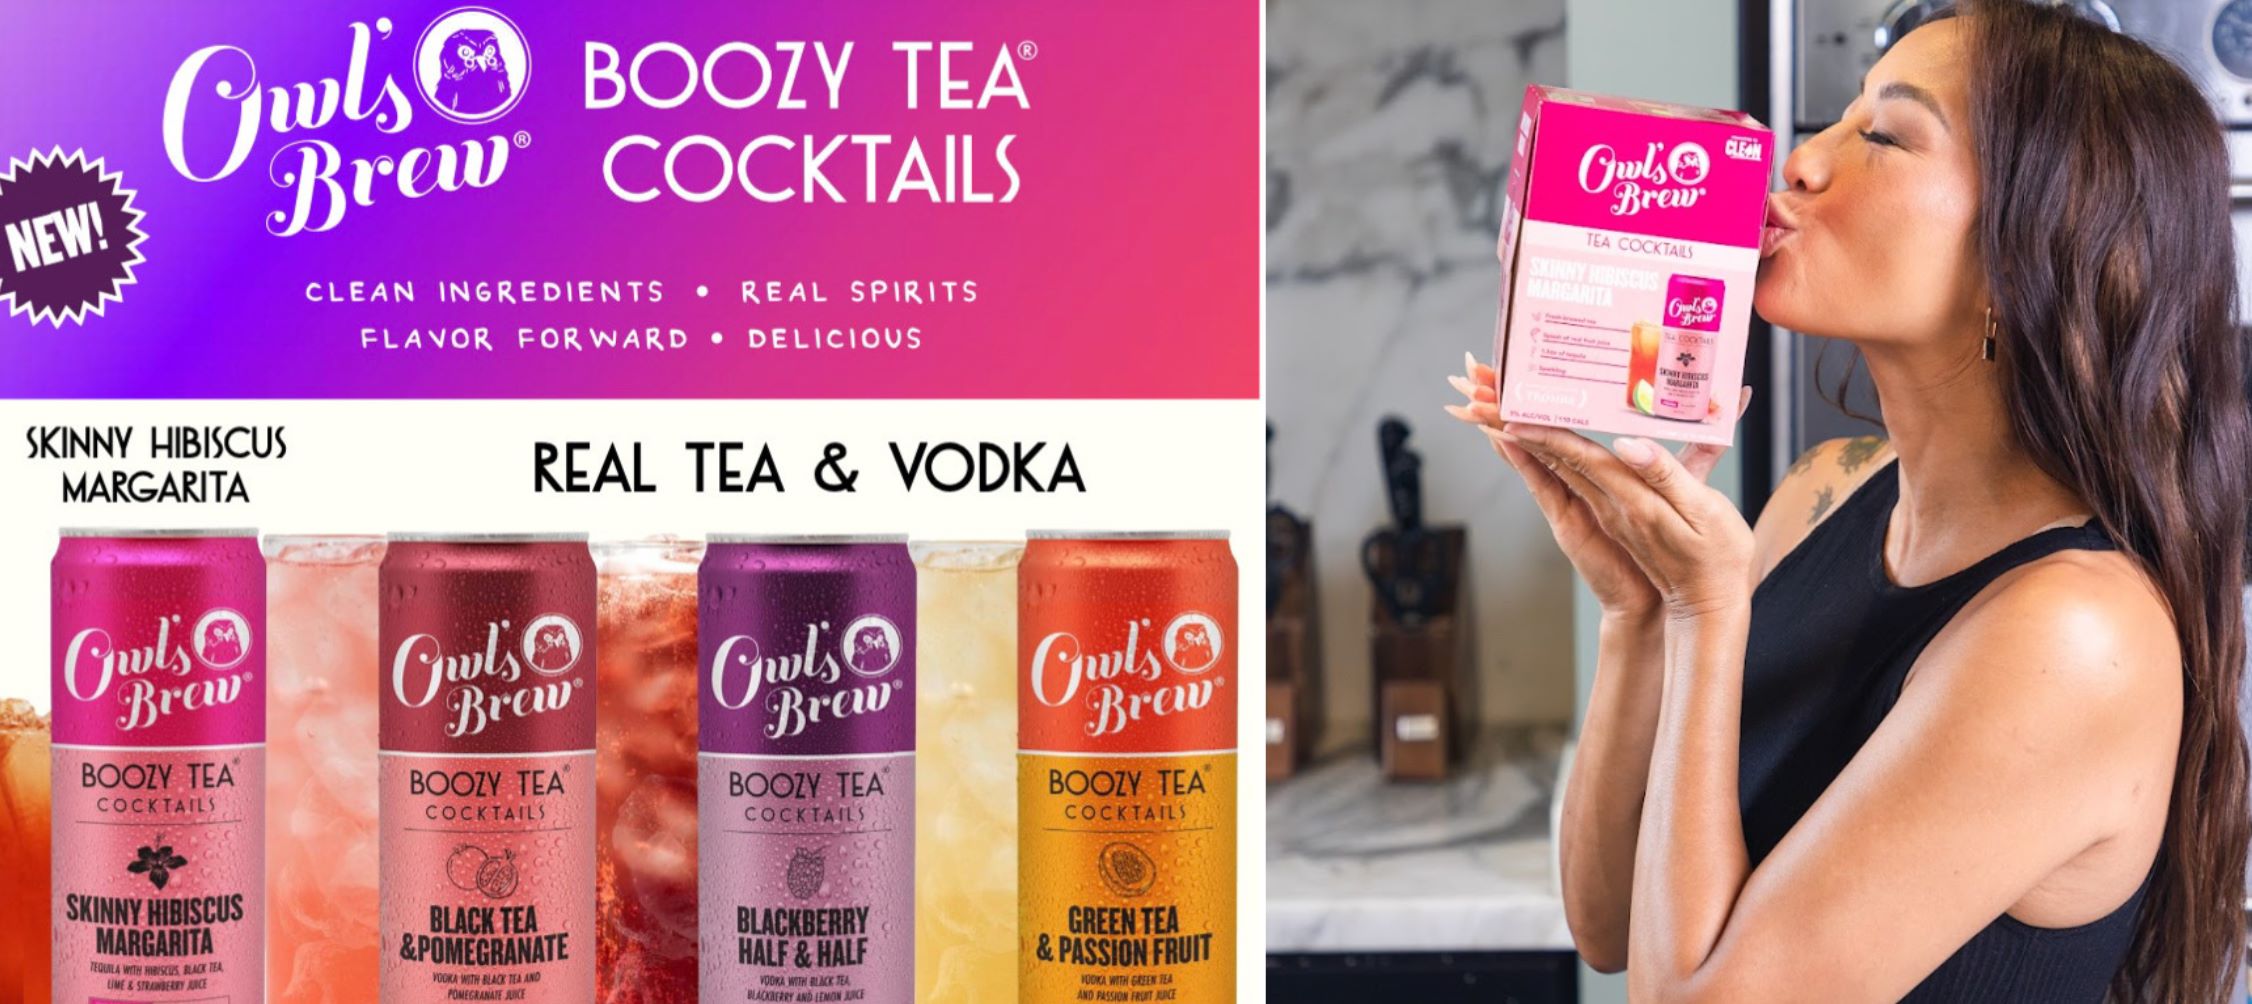 Owl’s Brew Launches Spirit-Based Tea Cocktails – Owl’s Brew Tea Cocktails